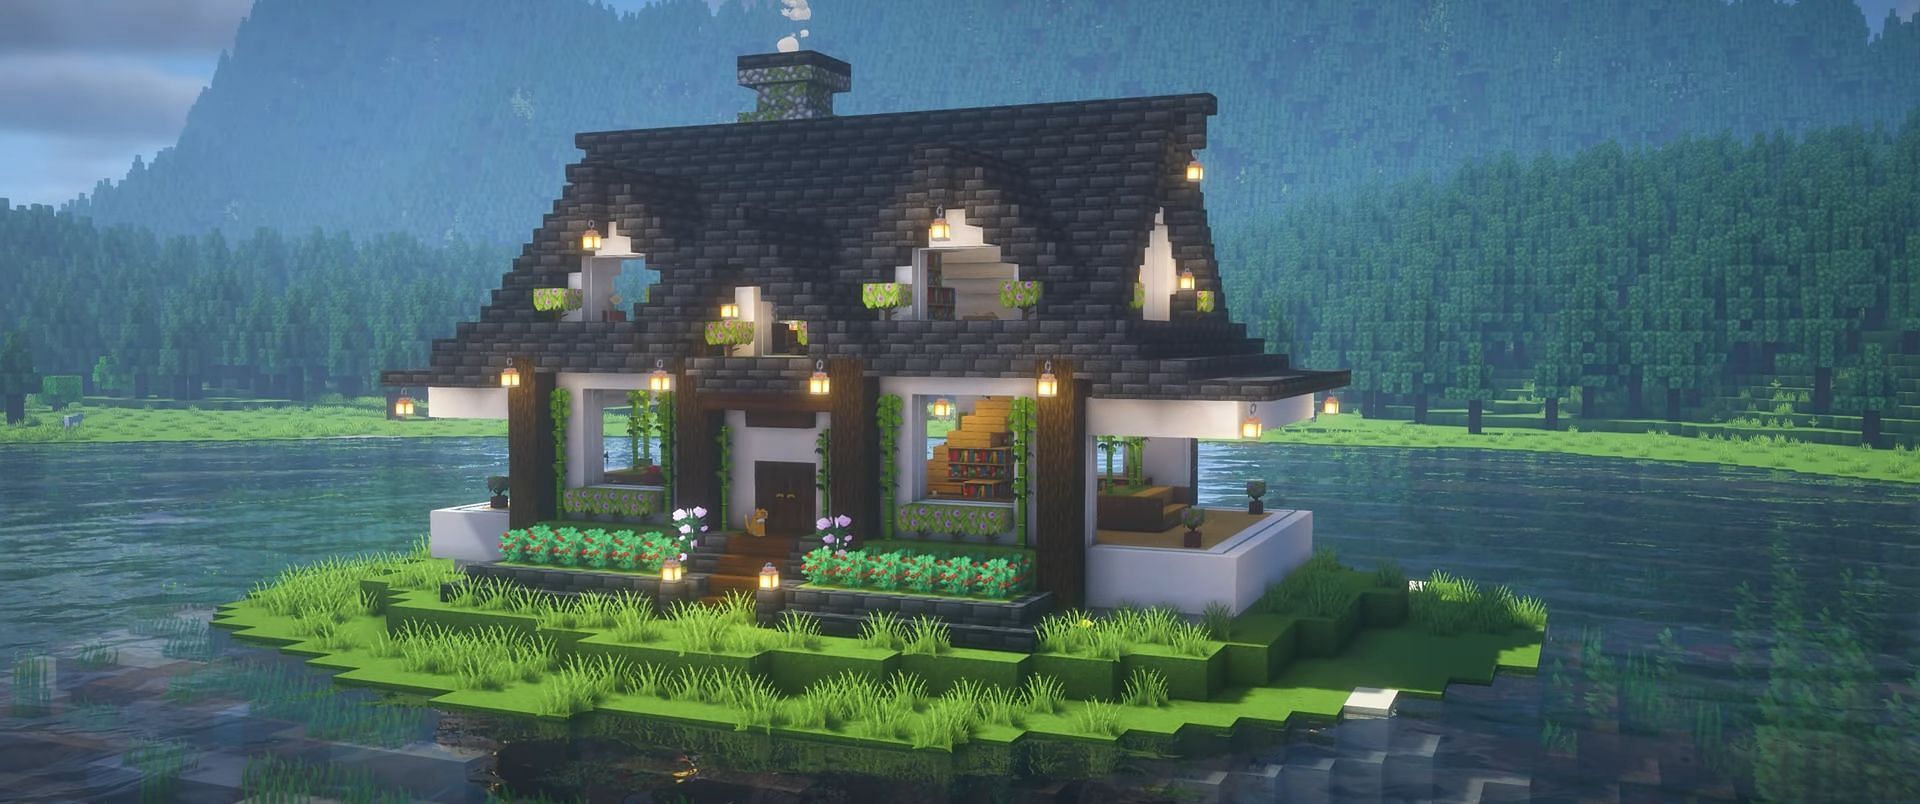 This house design is hugely assisted by its serene lake location (Image via NydiaLilium/YouTube)